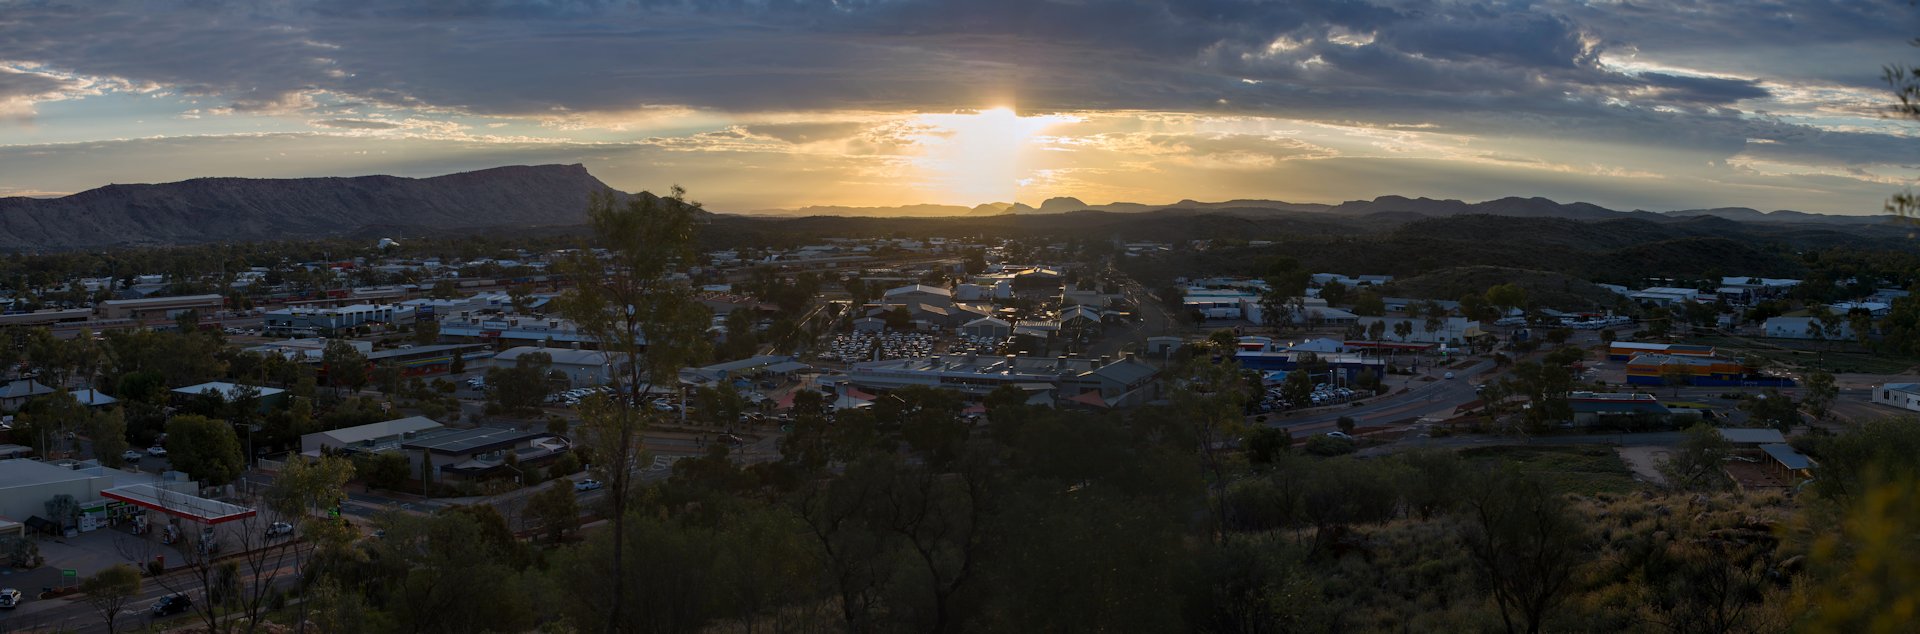 Sunset over Alice Springs and the MacDonnell Ranges